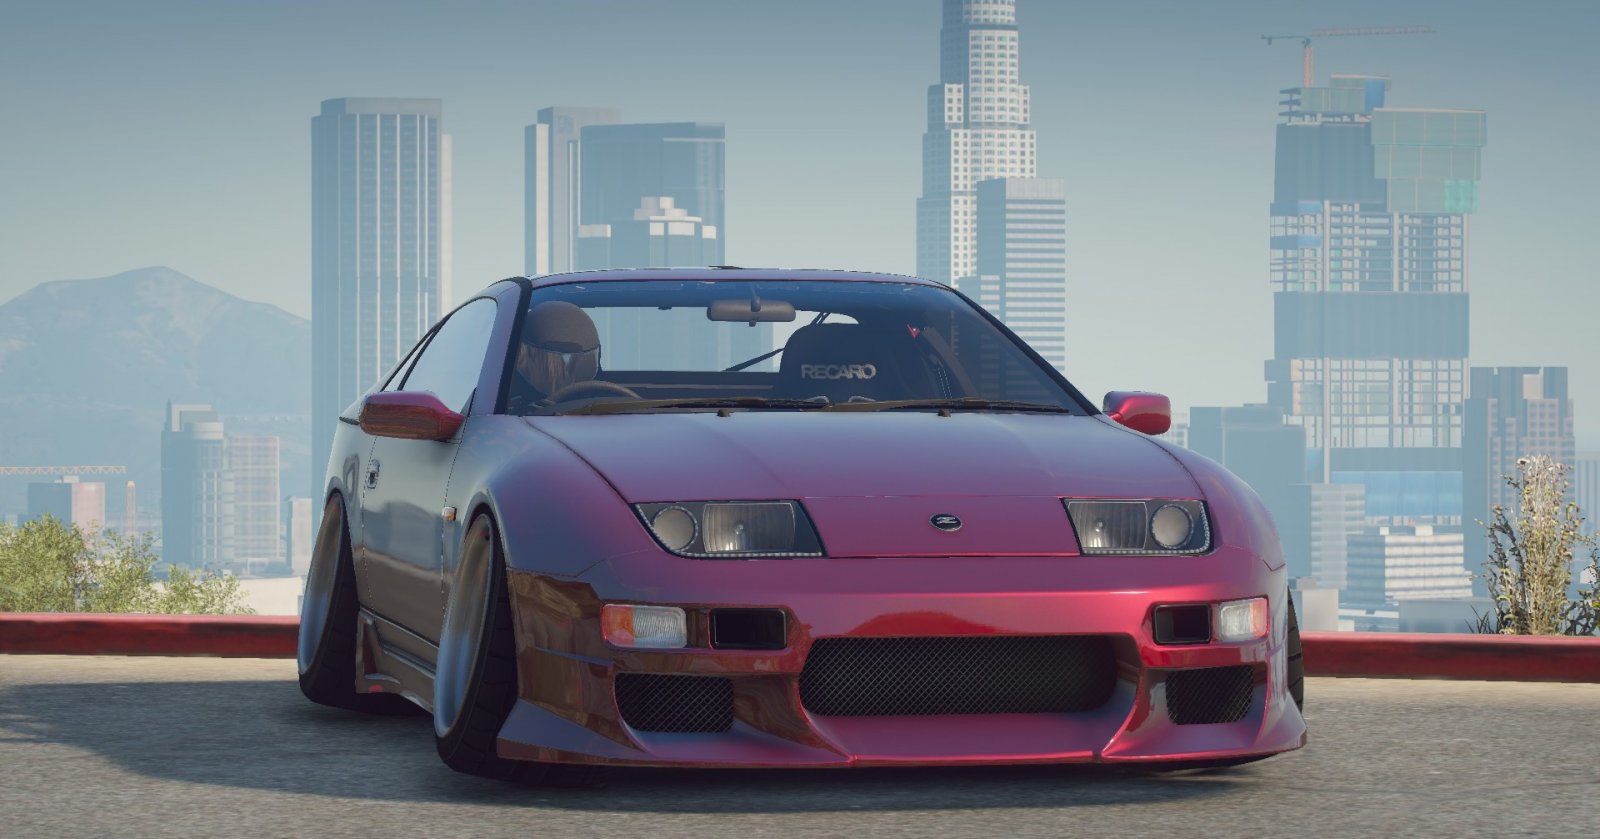 Stanced 300ZX Photo Shoot (4/6)